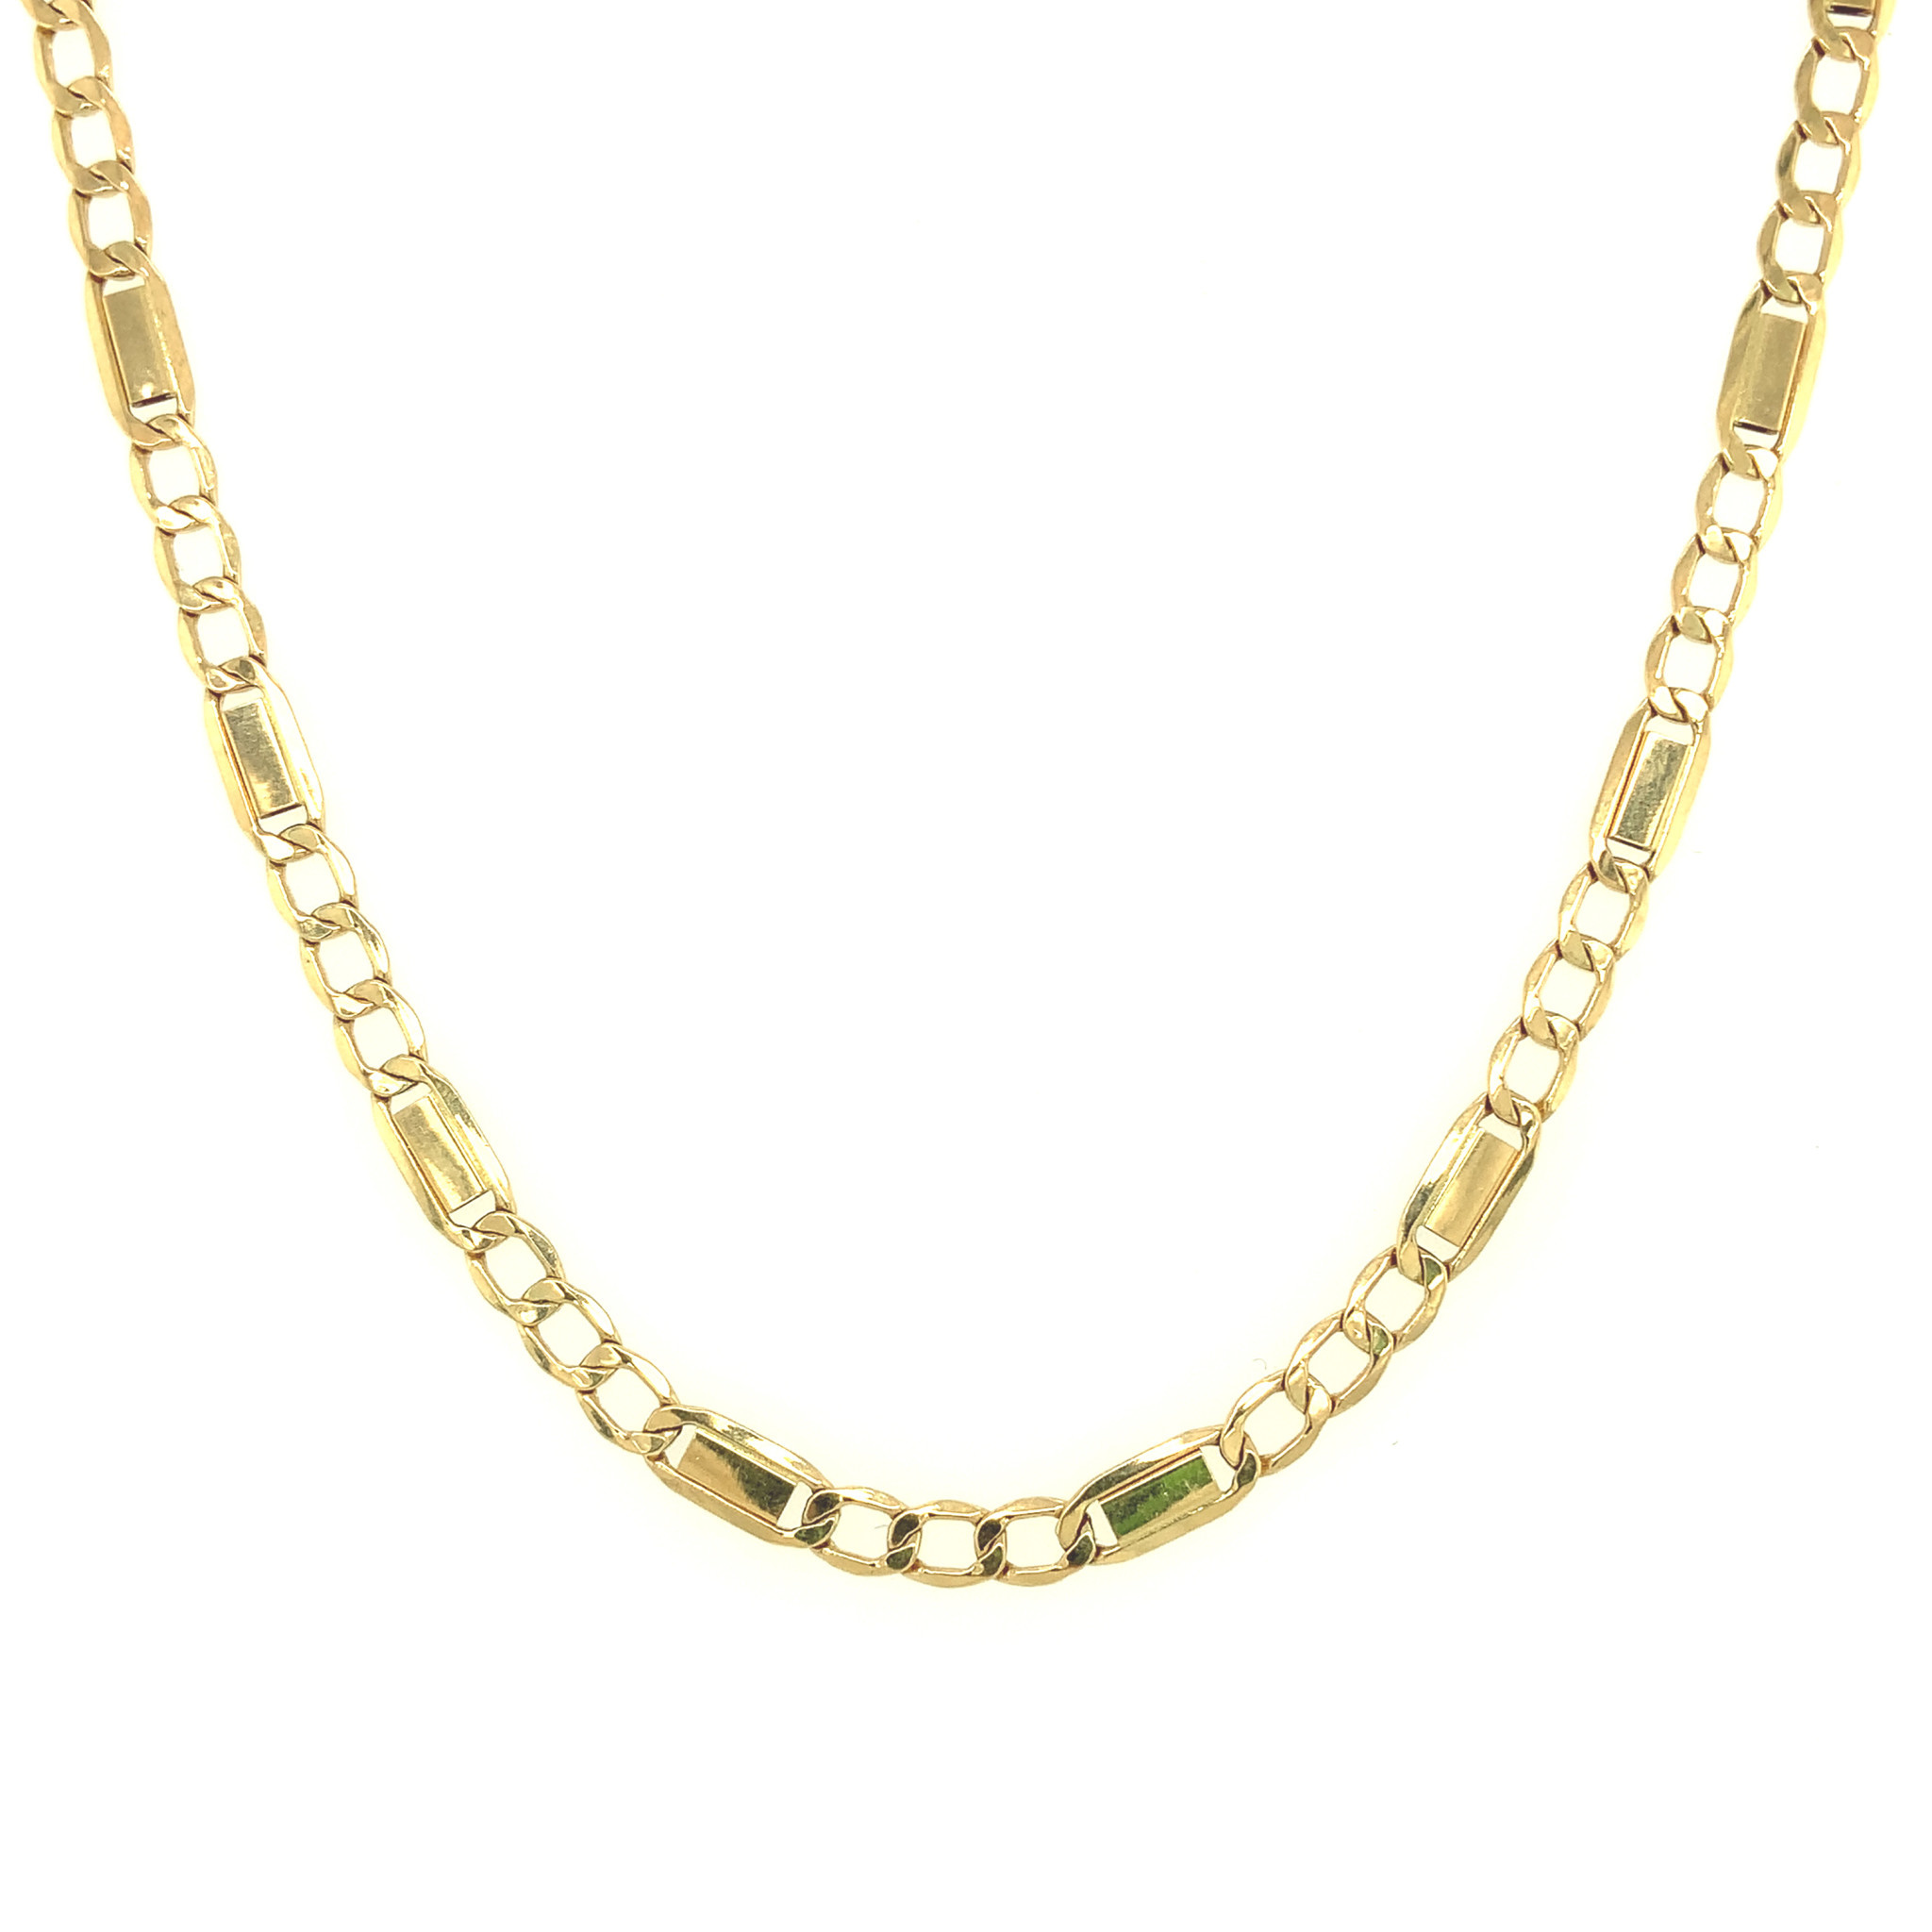 50143 18K YELLOW GOLD 4MM 24" HOLLOW SQUARE CENETR TIGERS EYE AND TRIPLE CUBAN LINK CHAIN